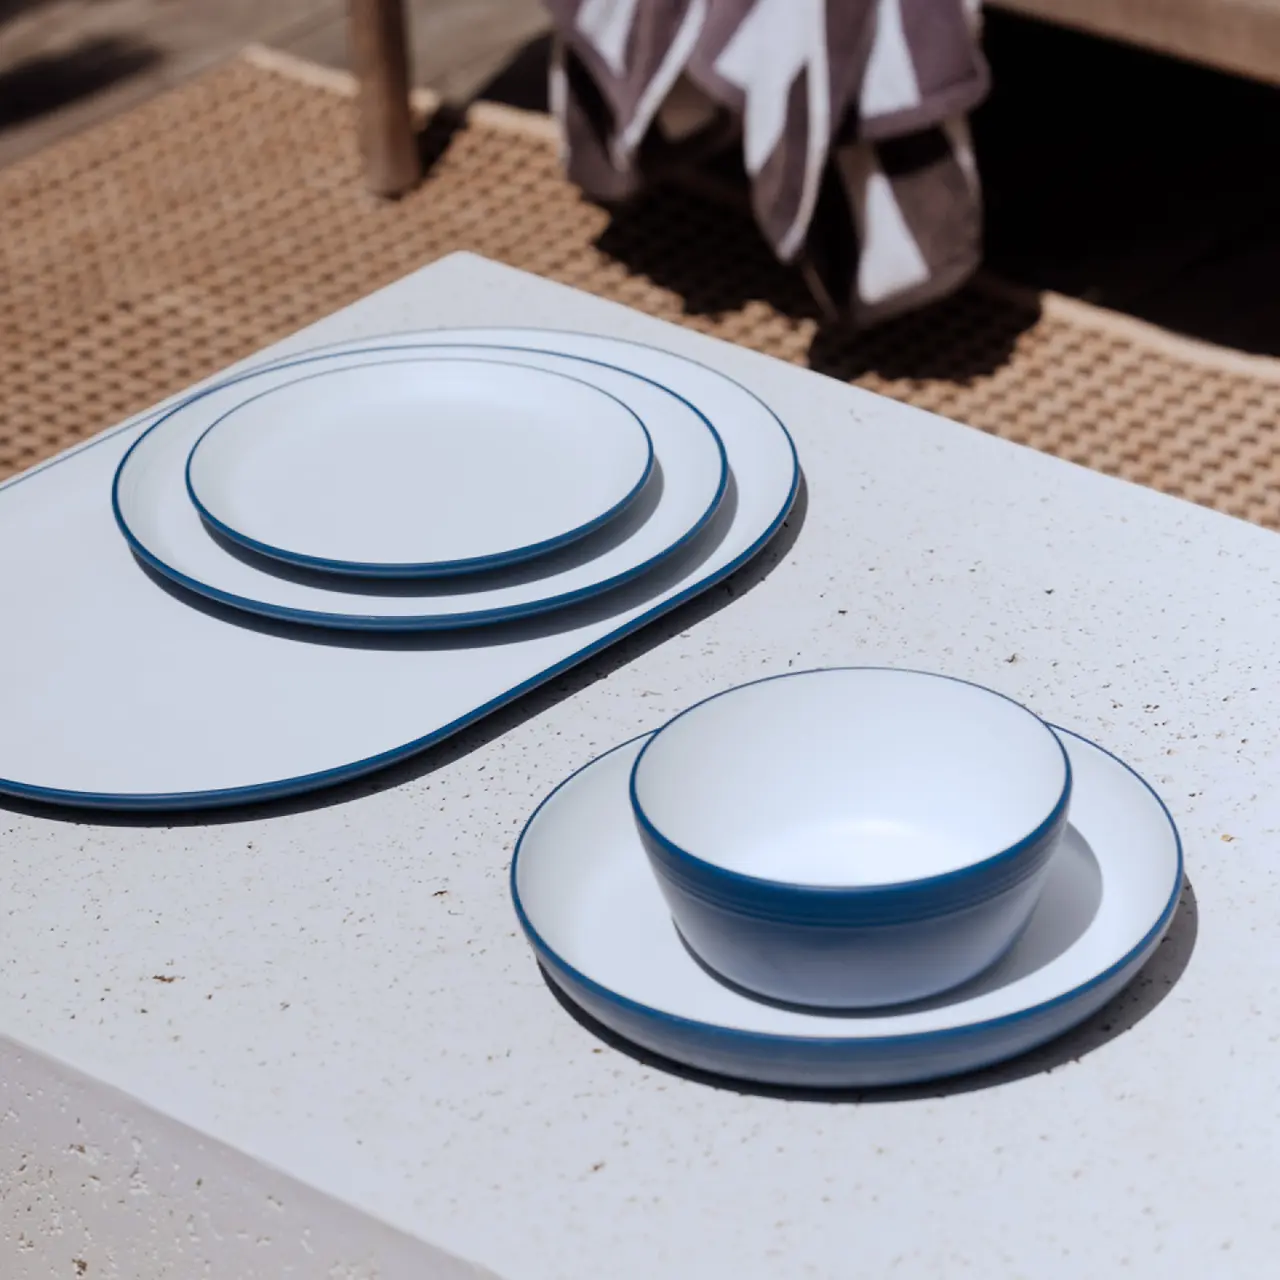 A set of white dishes with blue rims is neatly arranged on a textured outdoor table under sunlight.